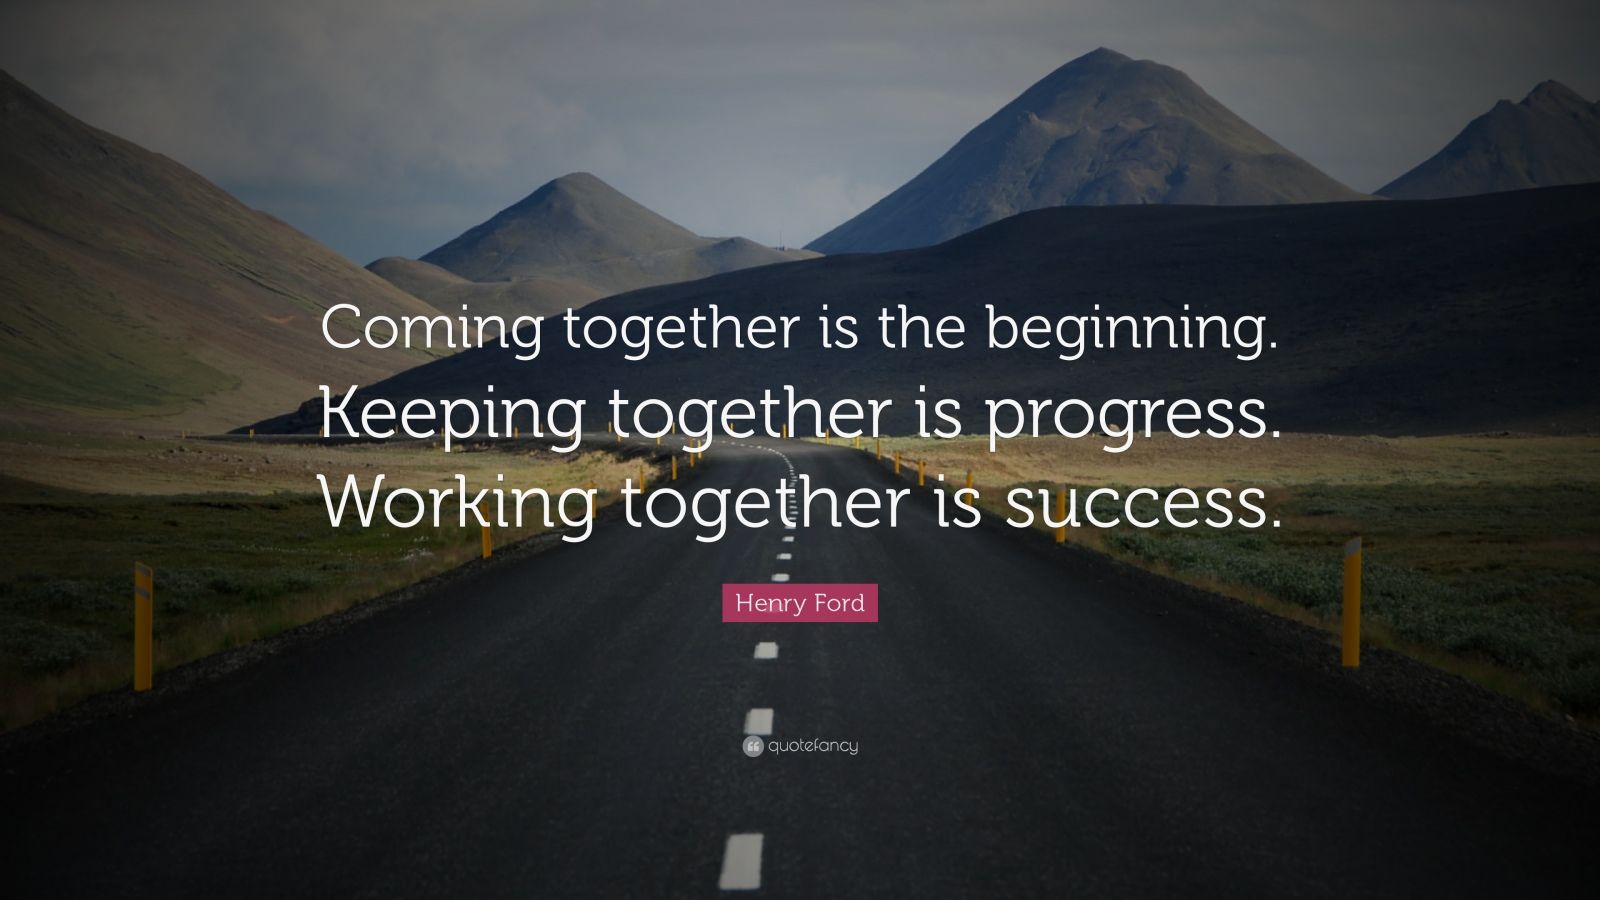 Henry Ford Quote: “Coming together is the beginning. Keeping together